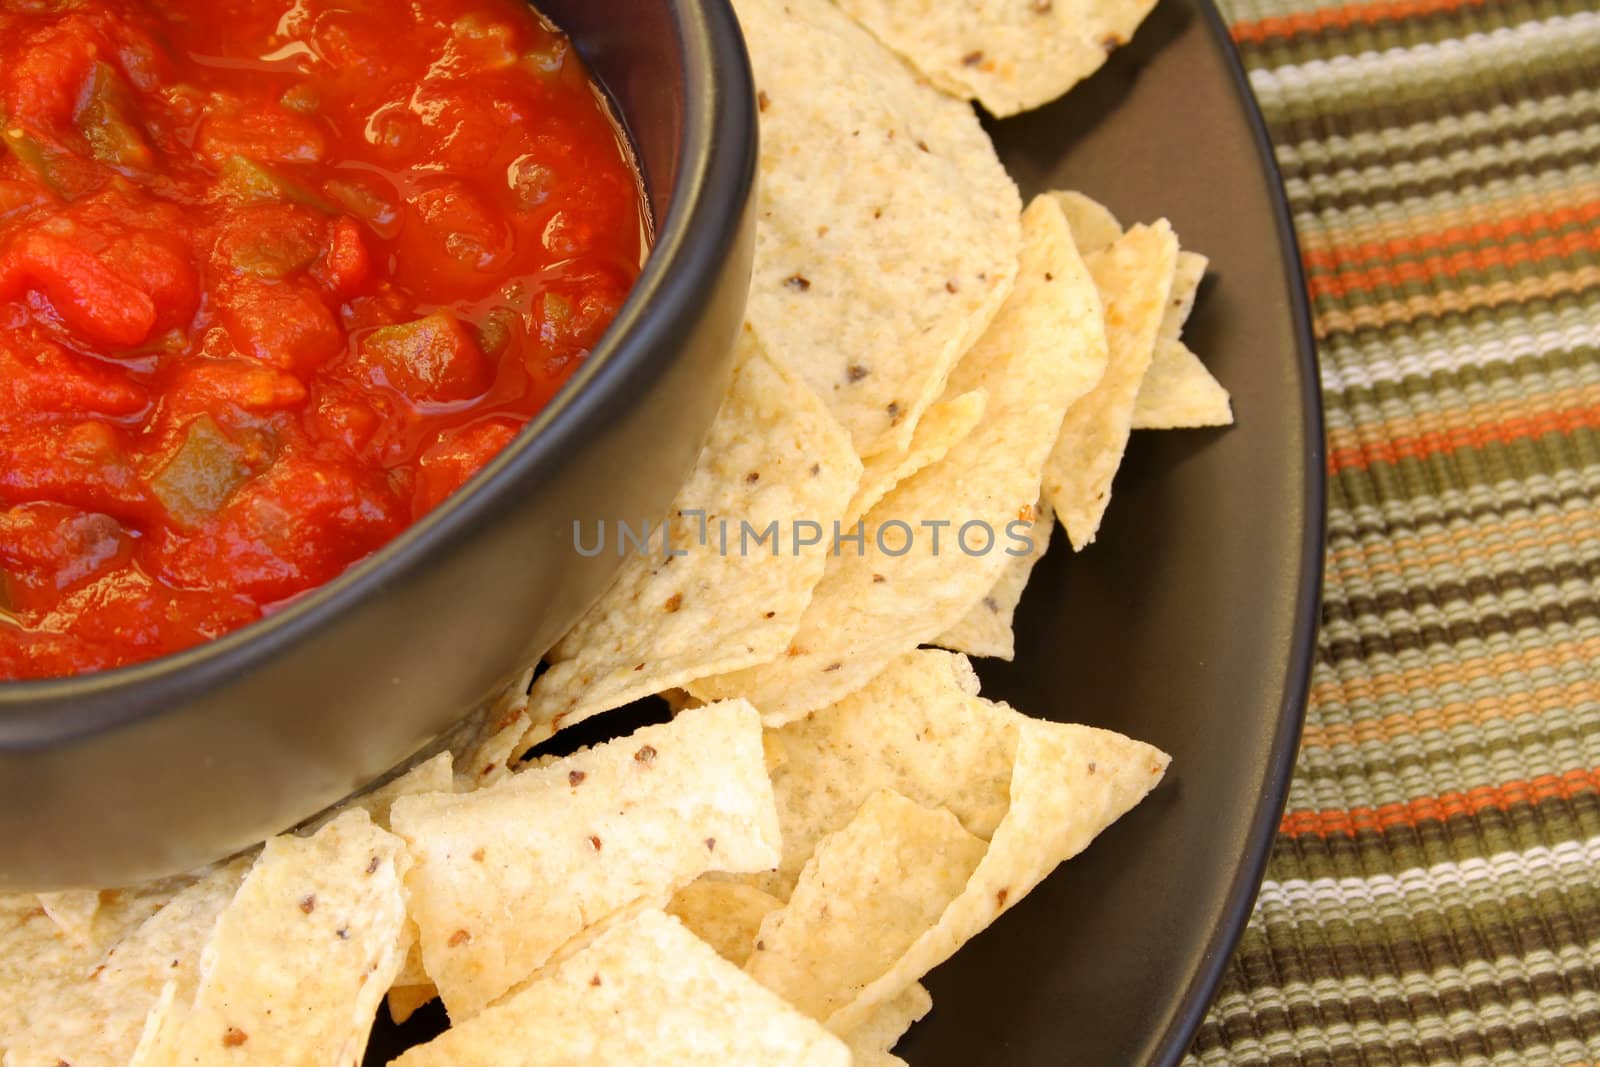 Salsa and chips by thephotoguy